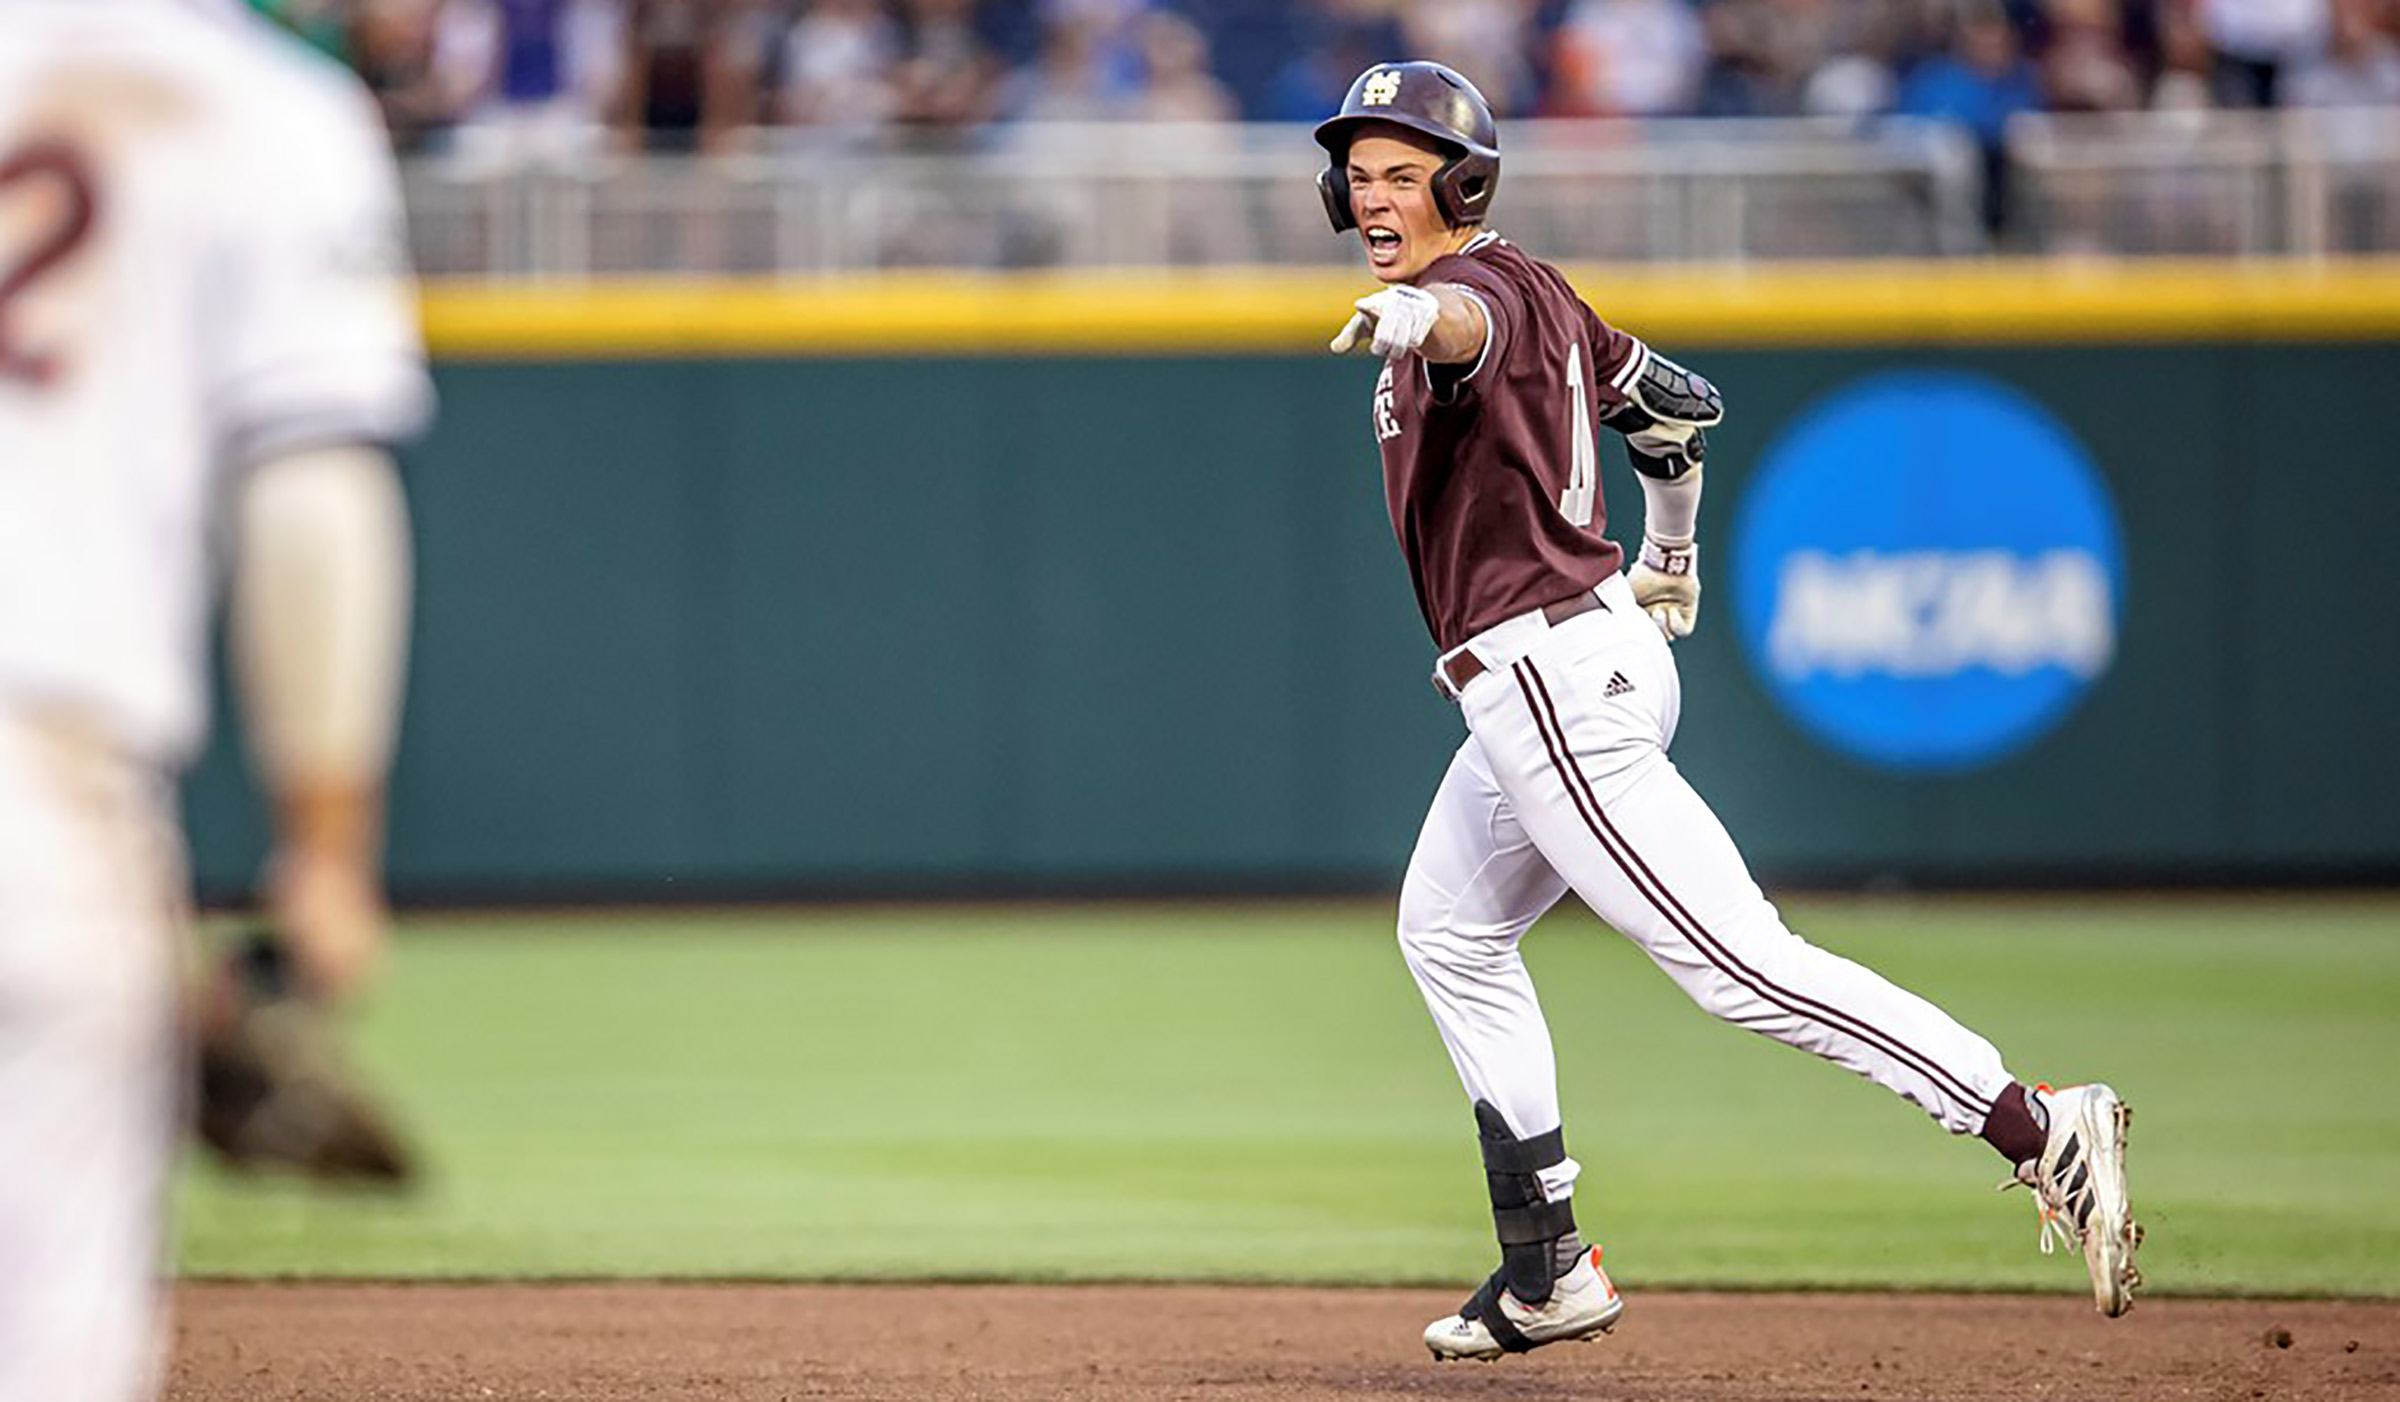 Guy in maroon baseball jersey and white baseball pants running bases while pointing